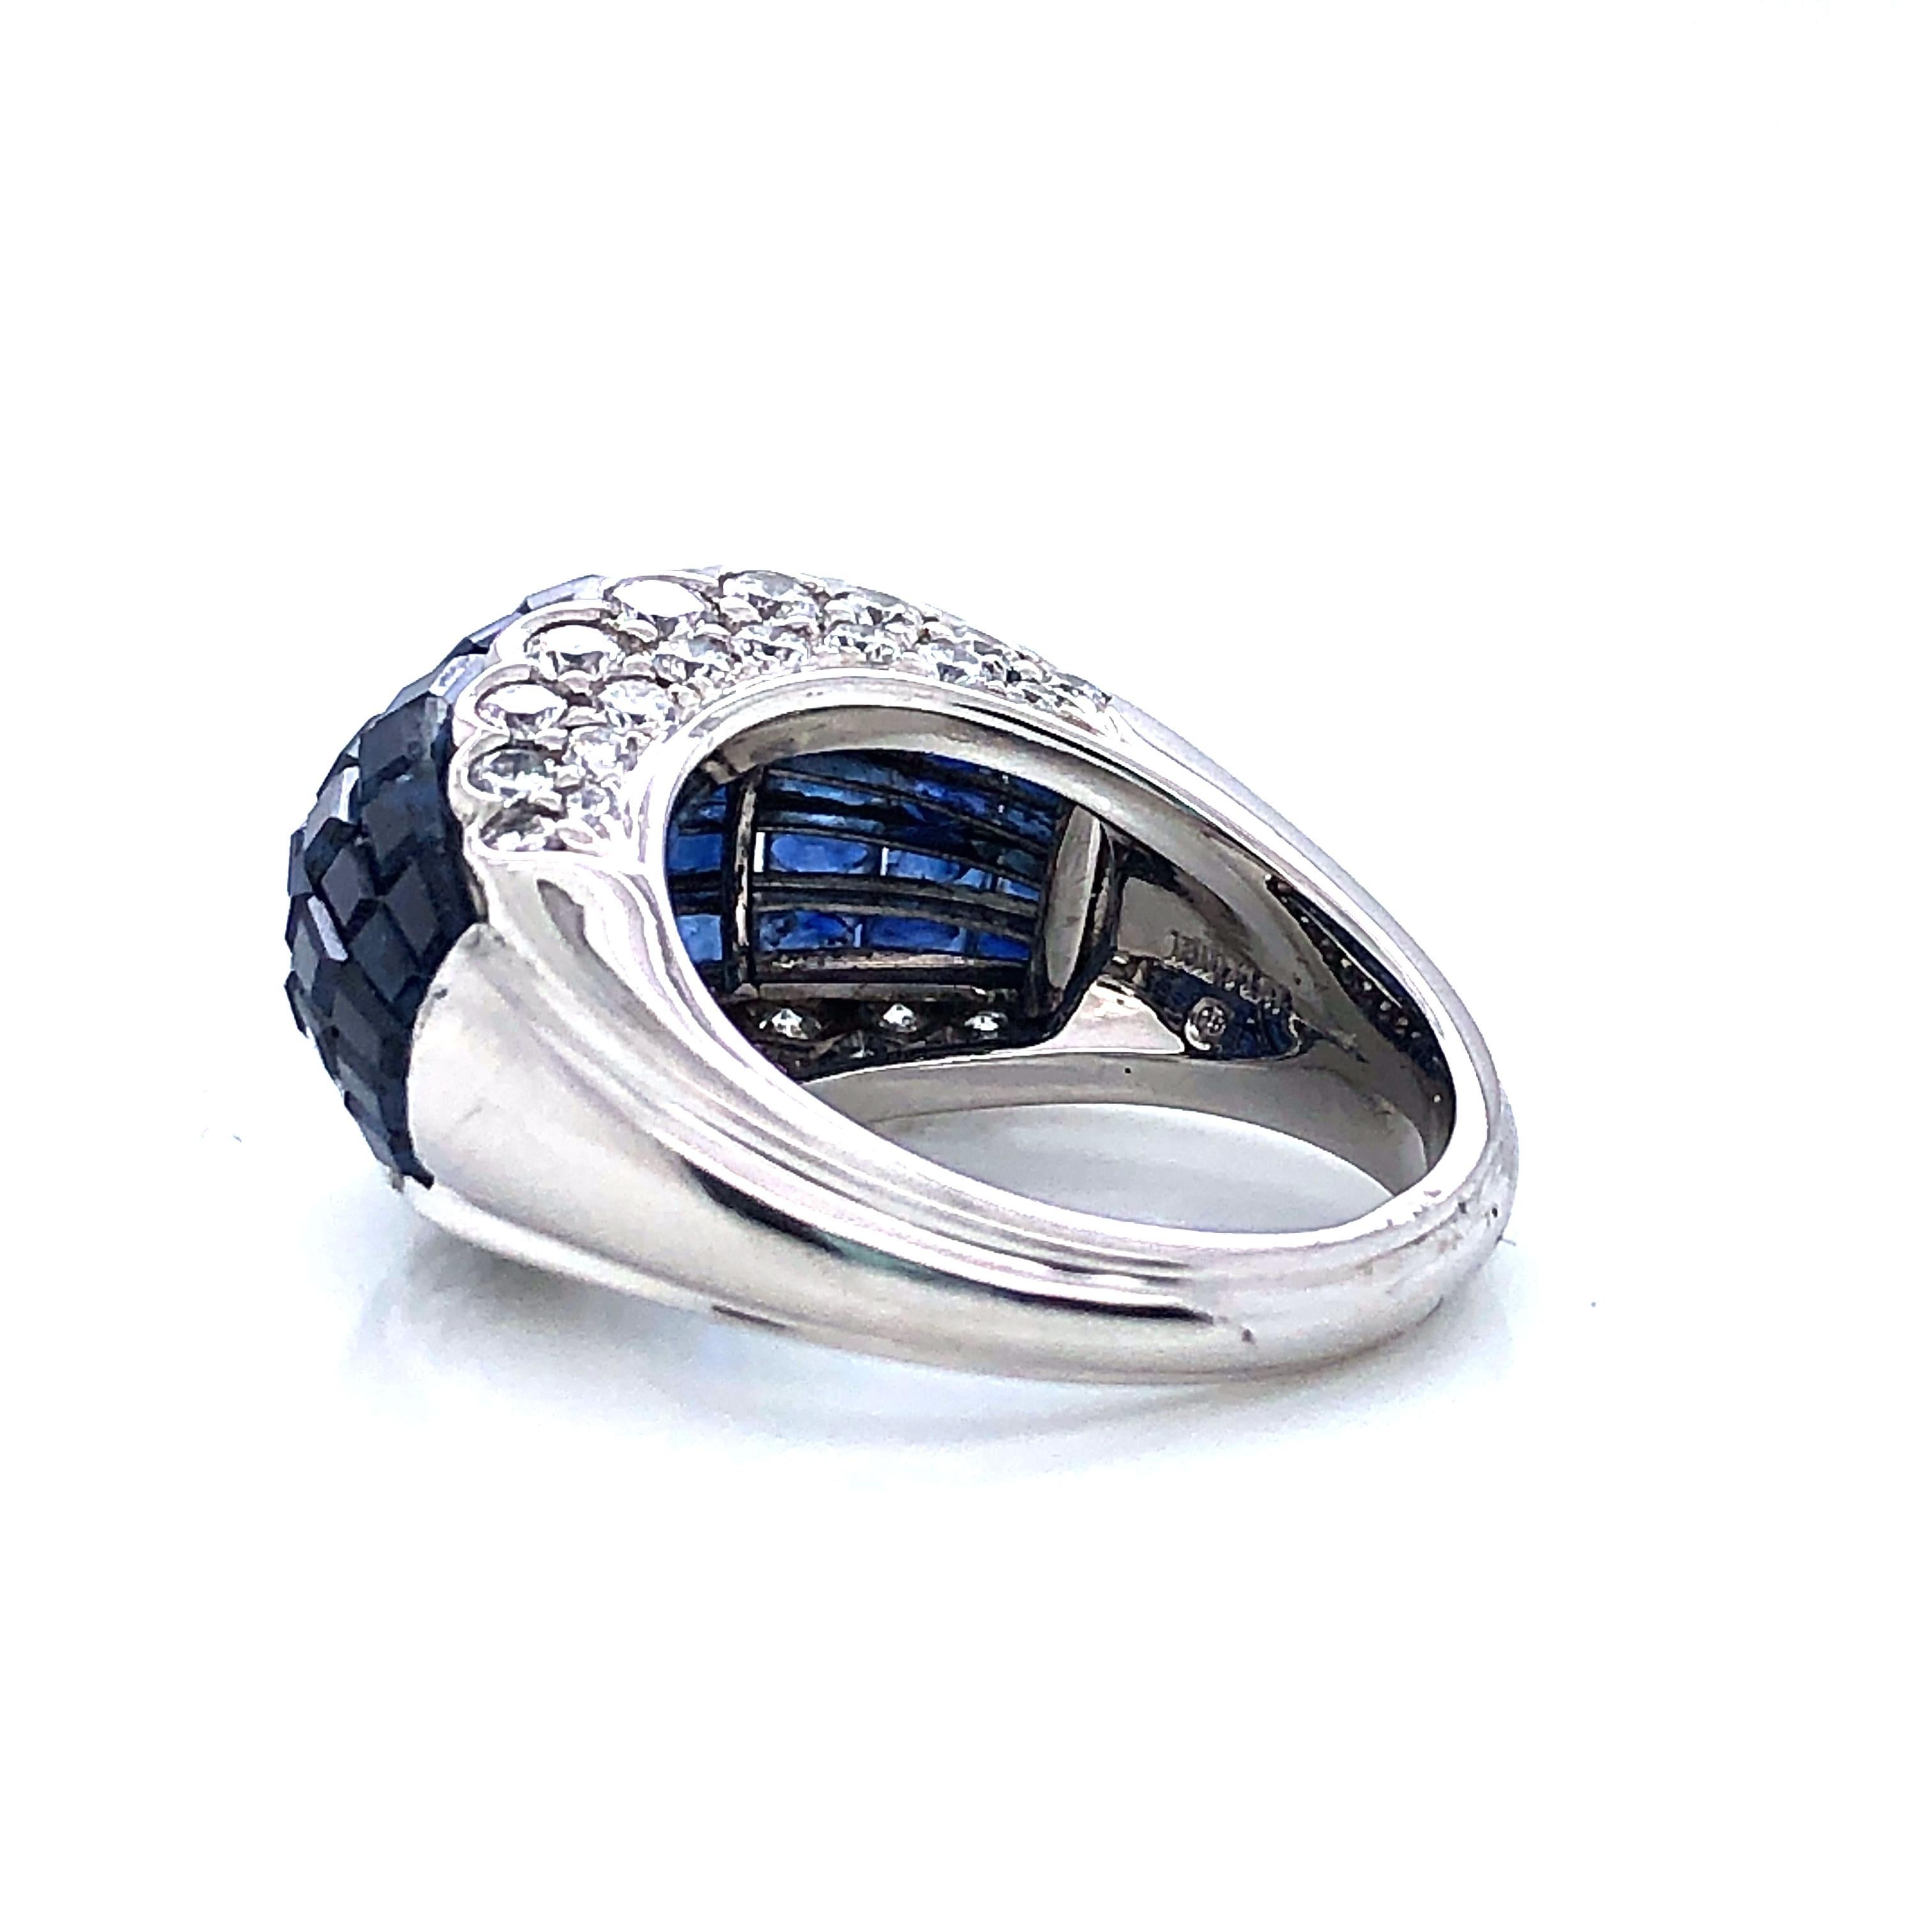 Oscar Heyman Platinum Invisibly Set Sapphire Bombe Ring In New Condition For Sale In New York City, NY